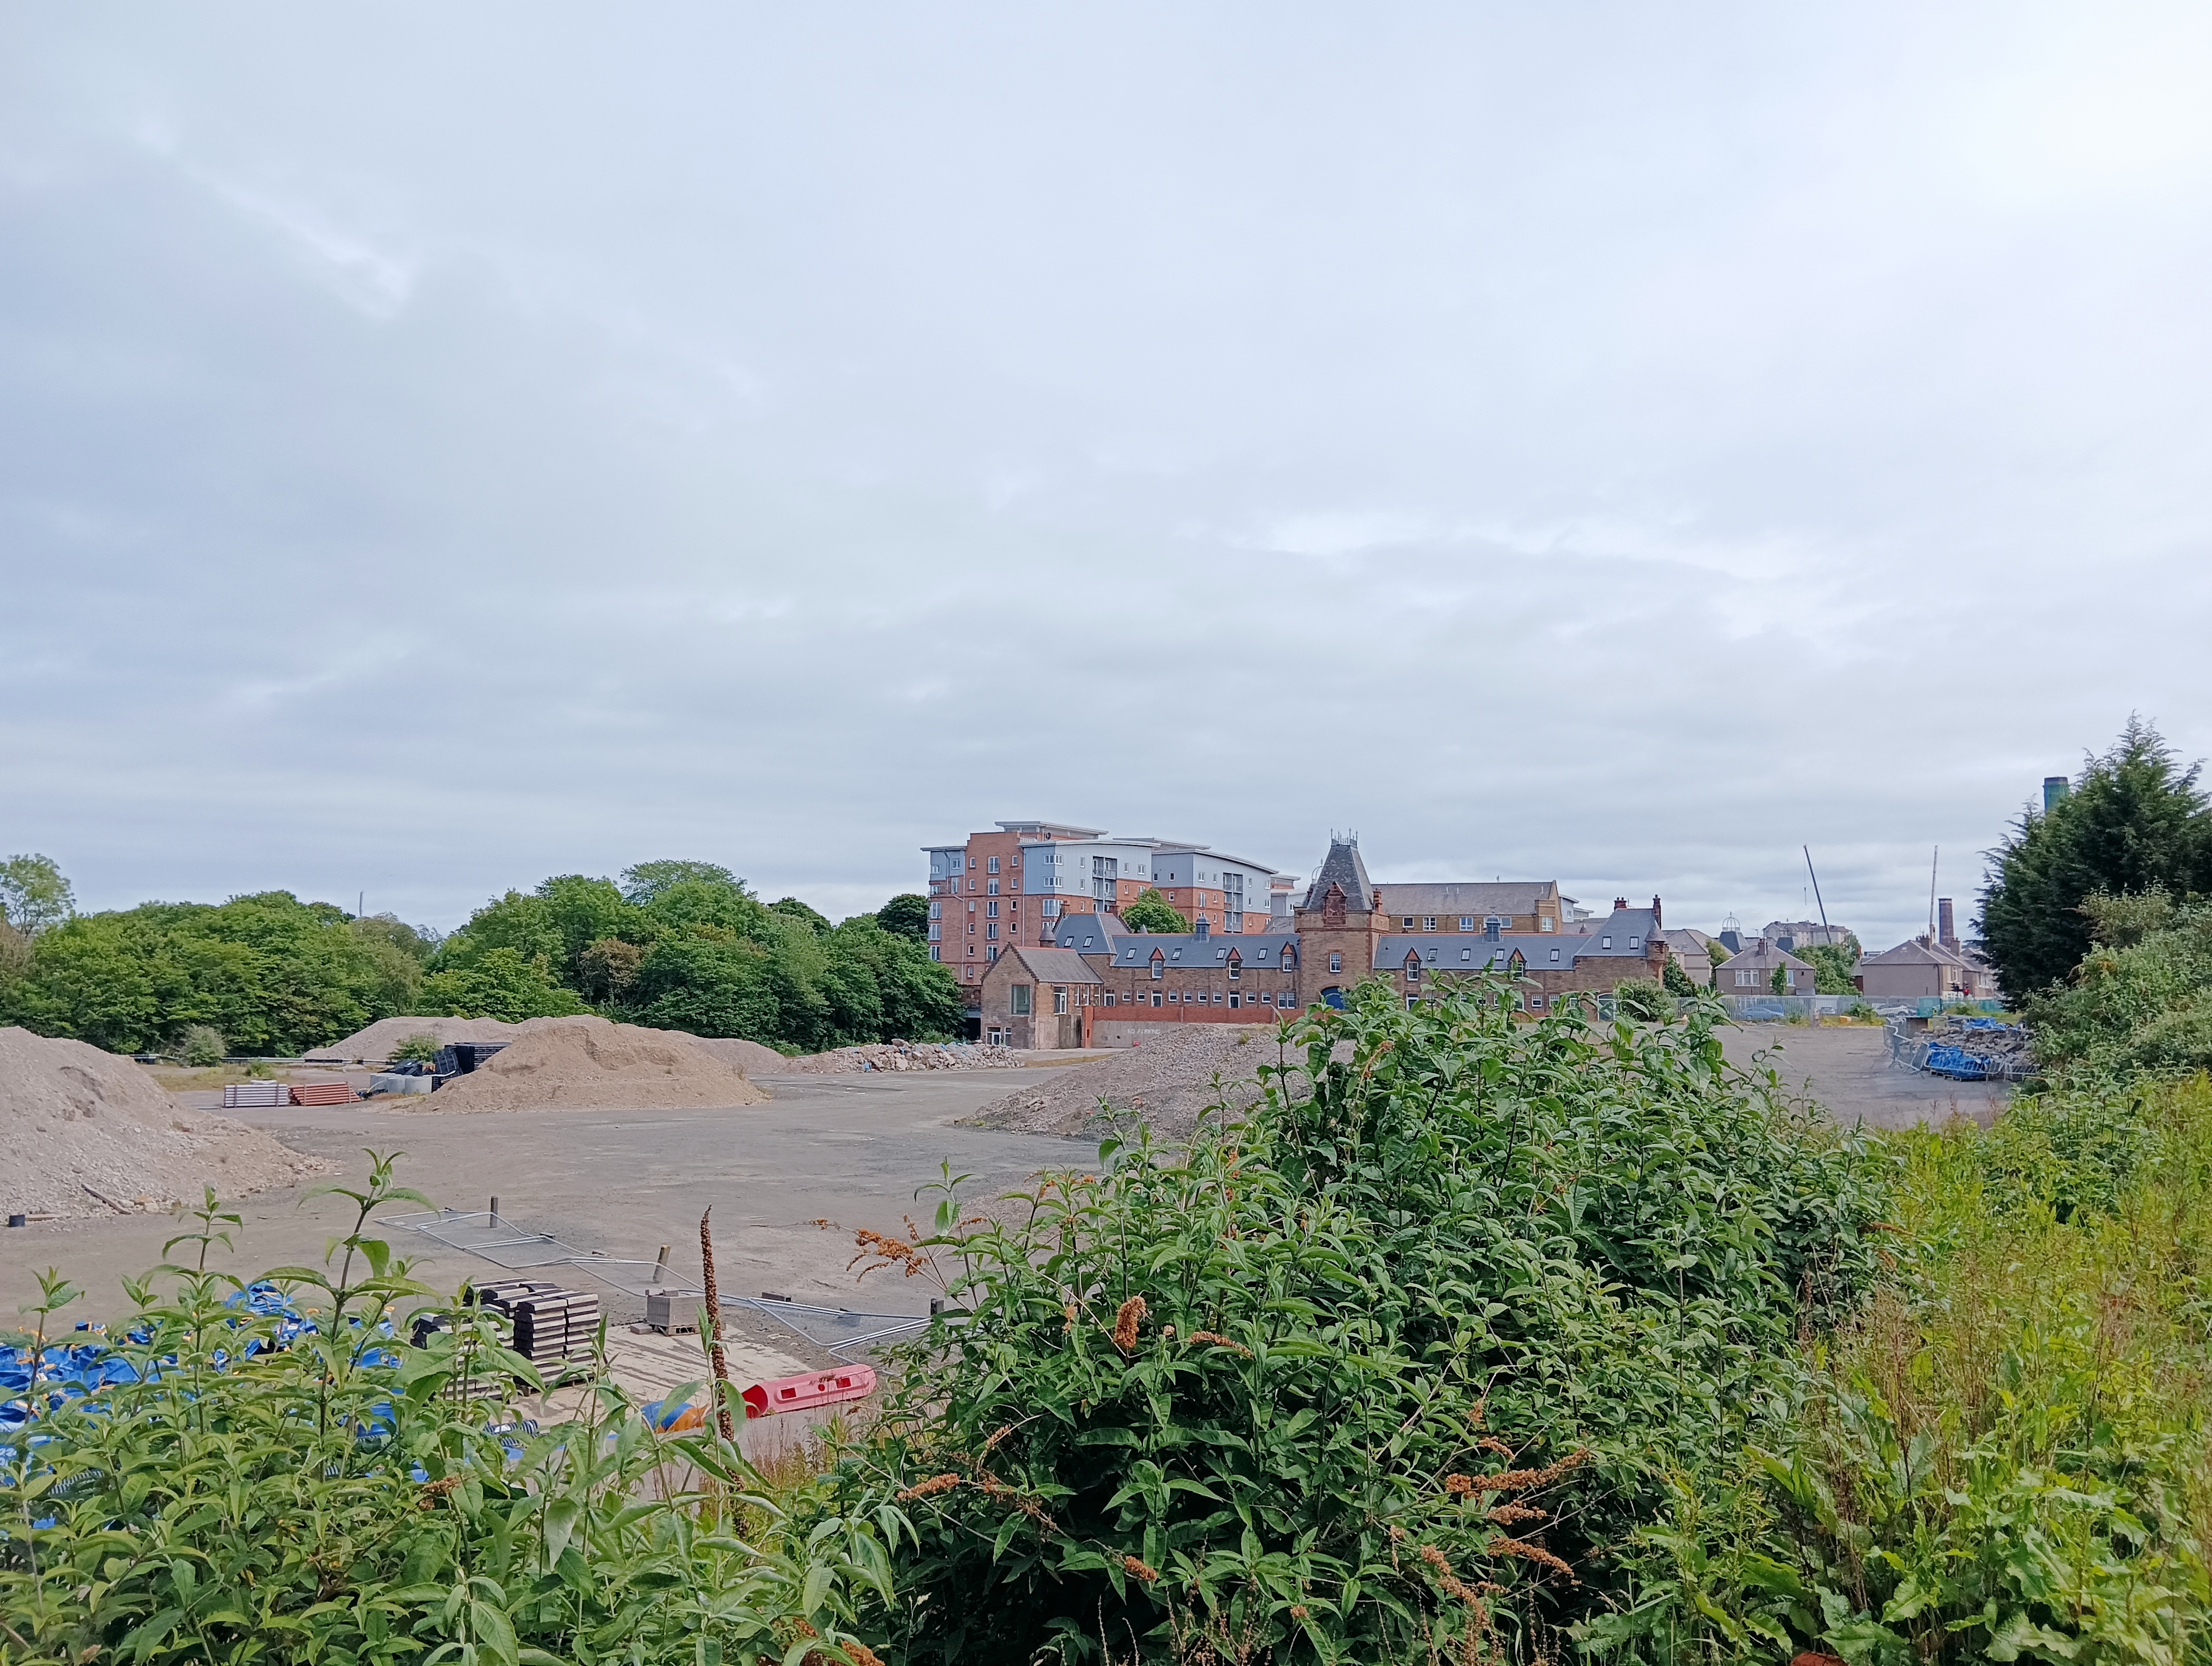 Consultation launched on proposals for Powderhall’s former Waste Transfer Station